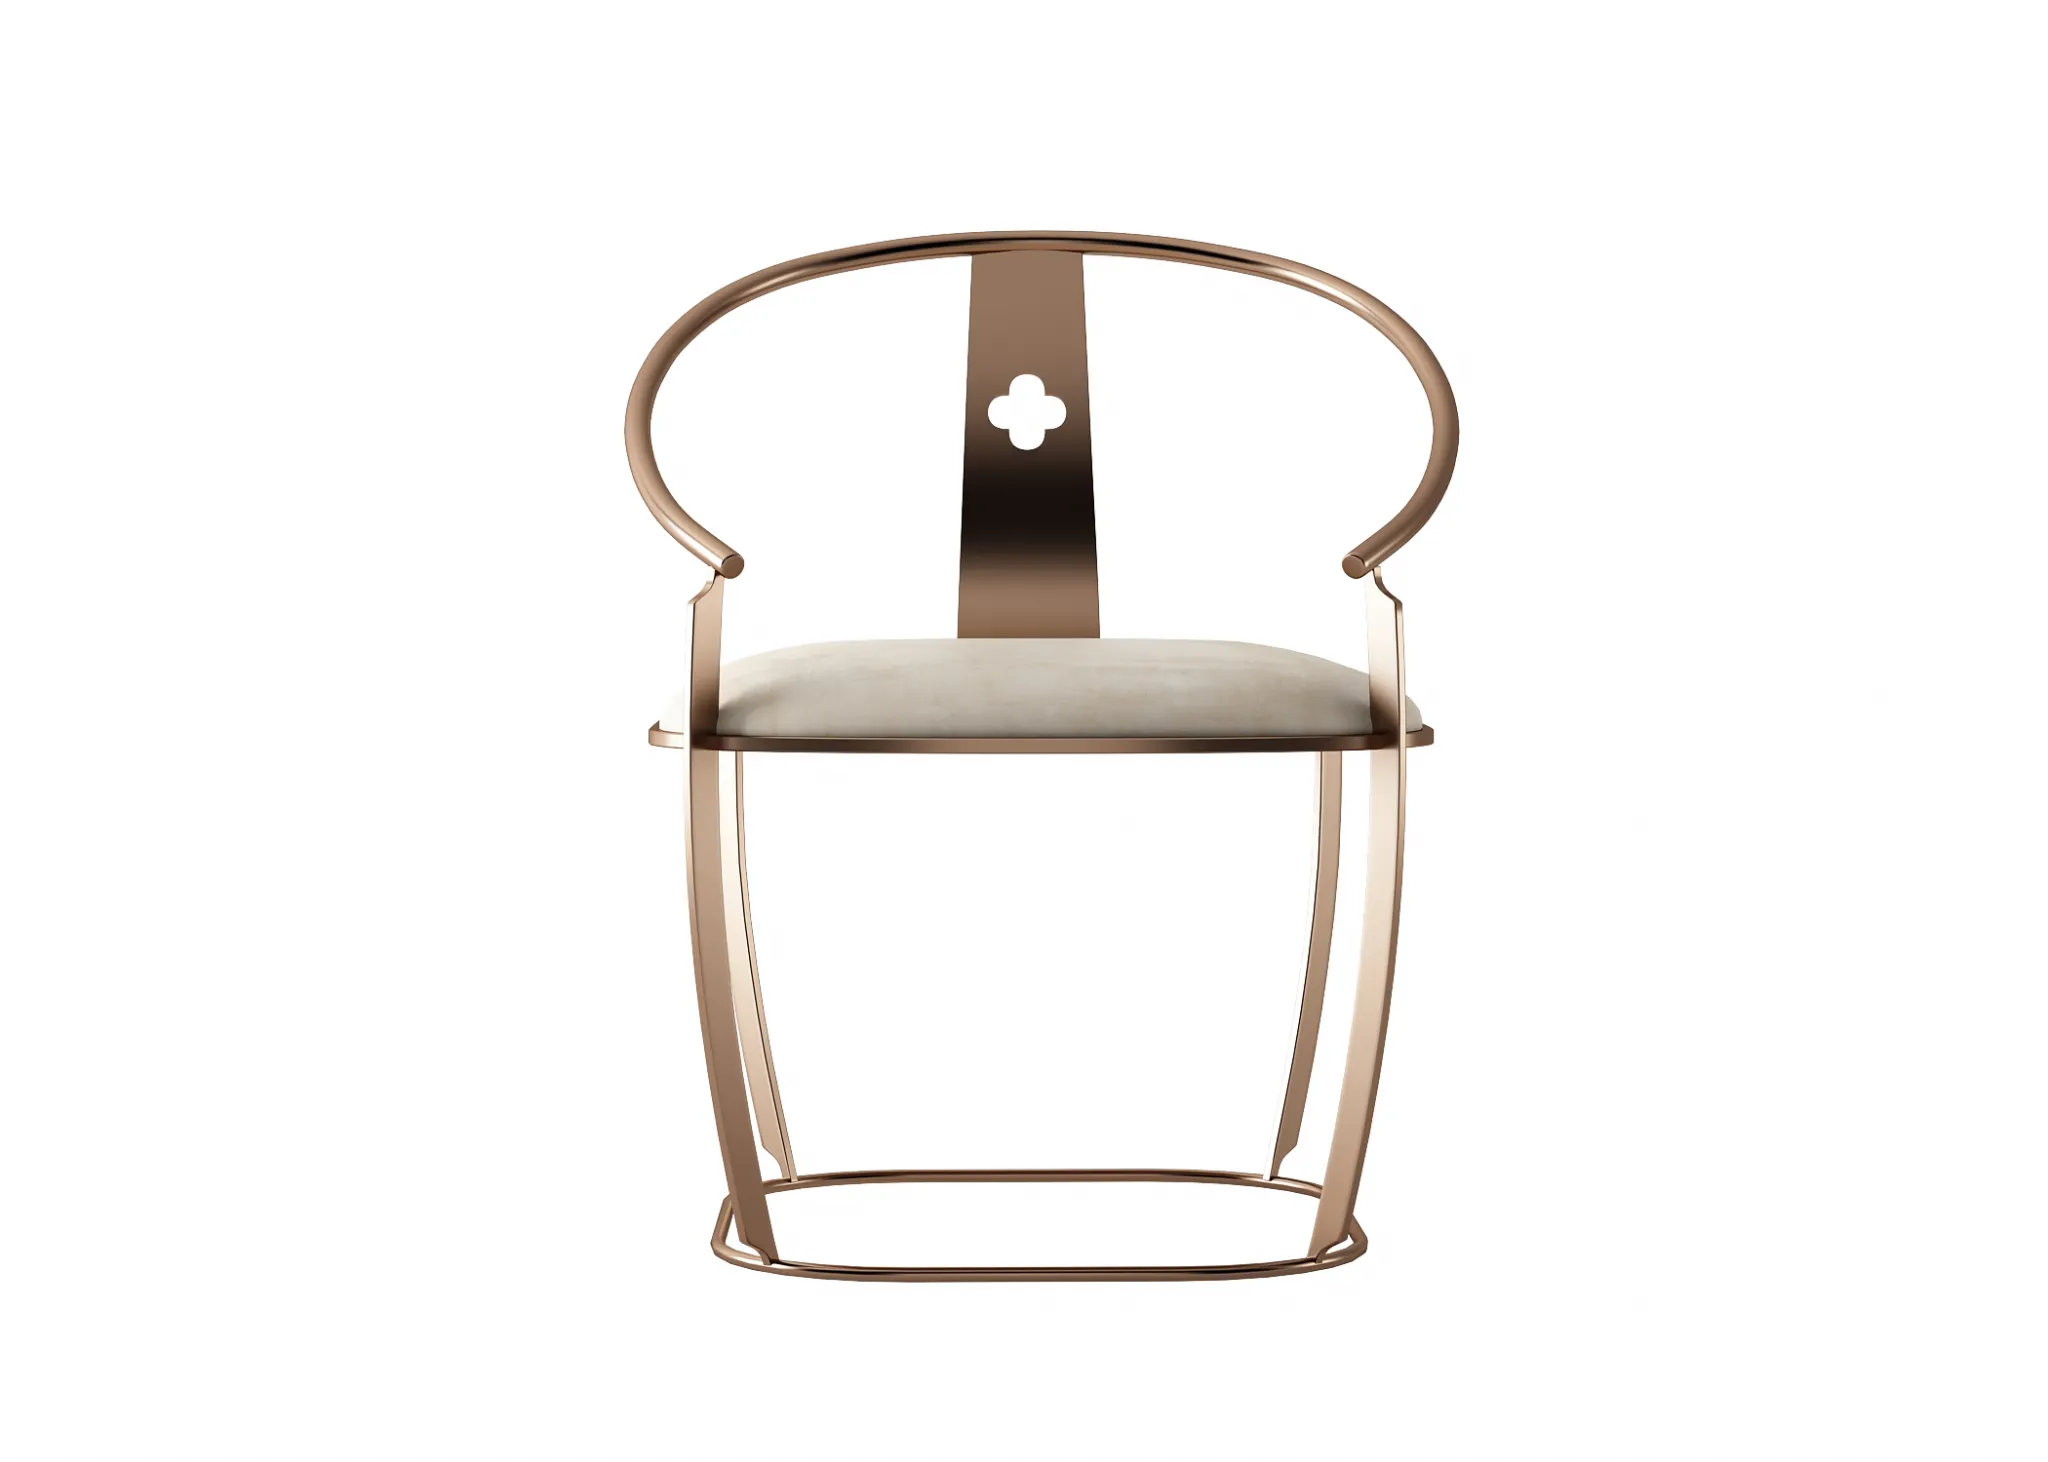 FURNITURE 3D MODELS – CHAIRS – 0522